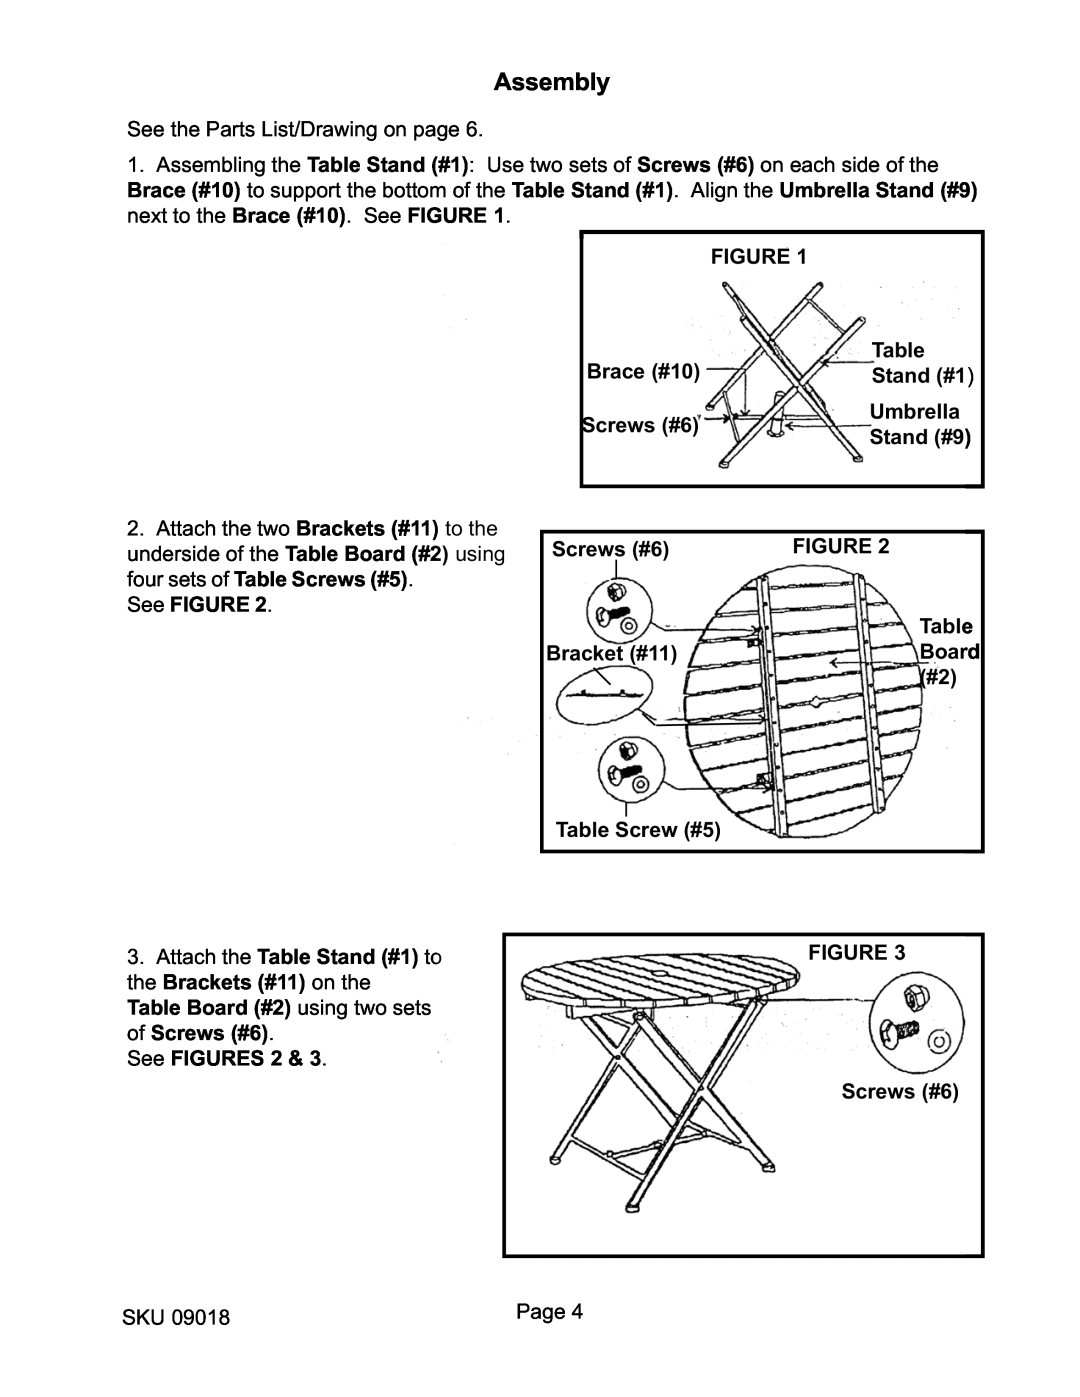 Harbor Freight Tools 9018 manual Assembly 